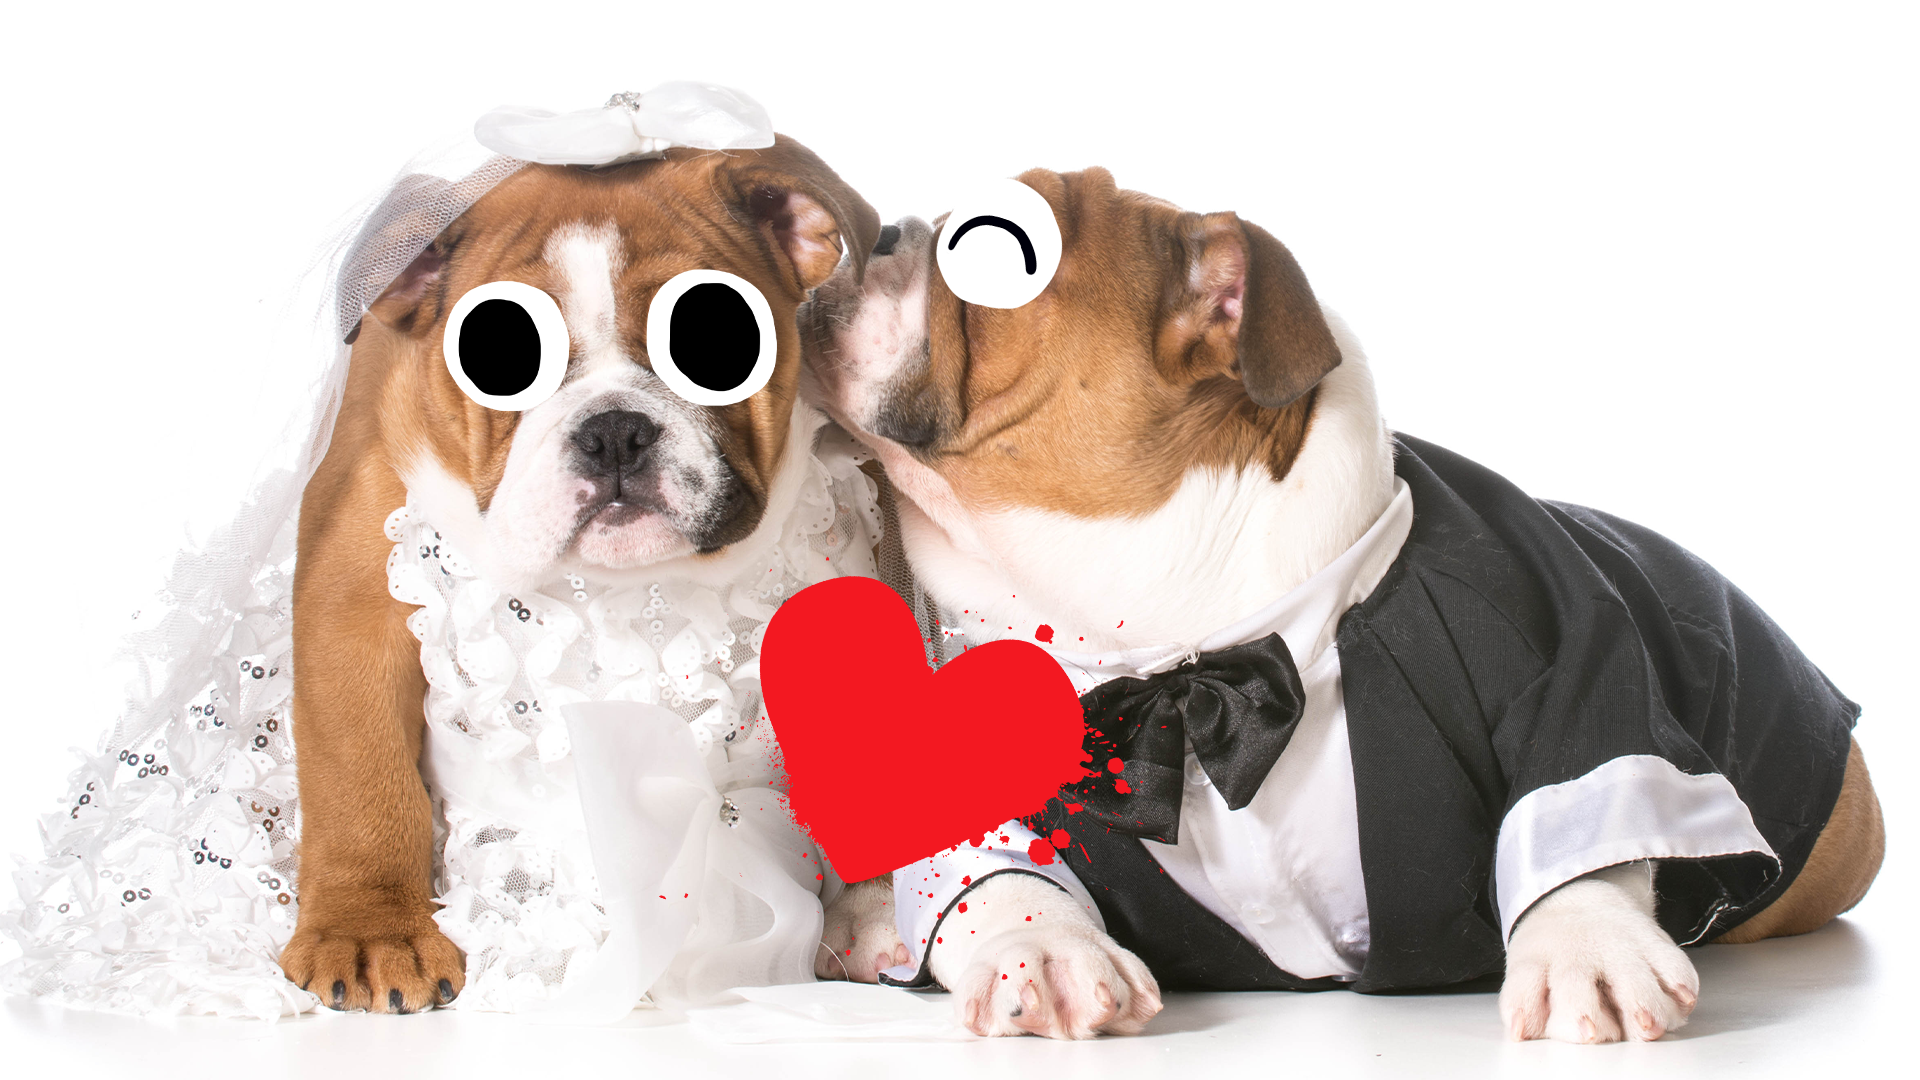 Two dogs dressed as bride and groom with heart